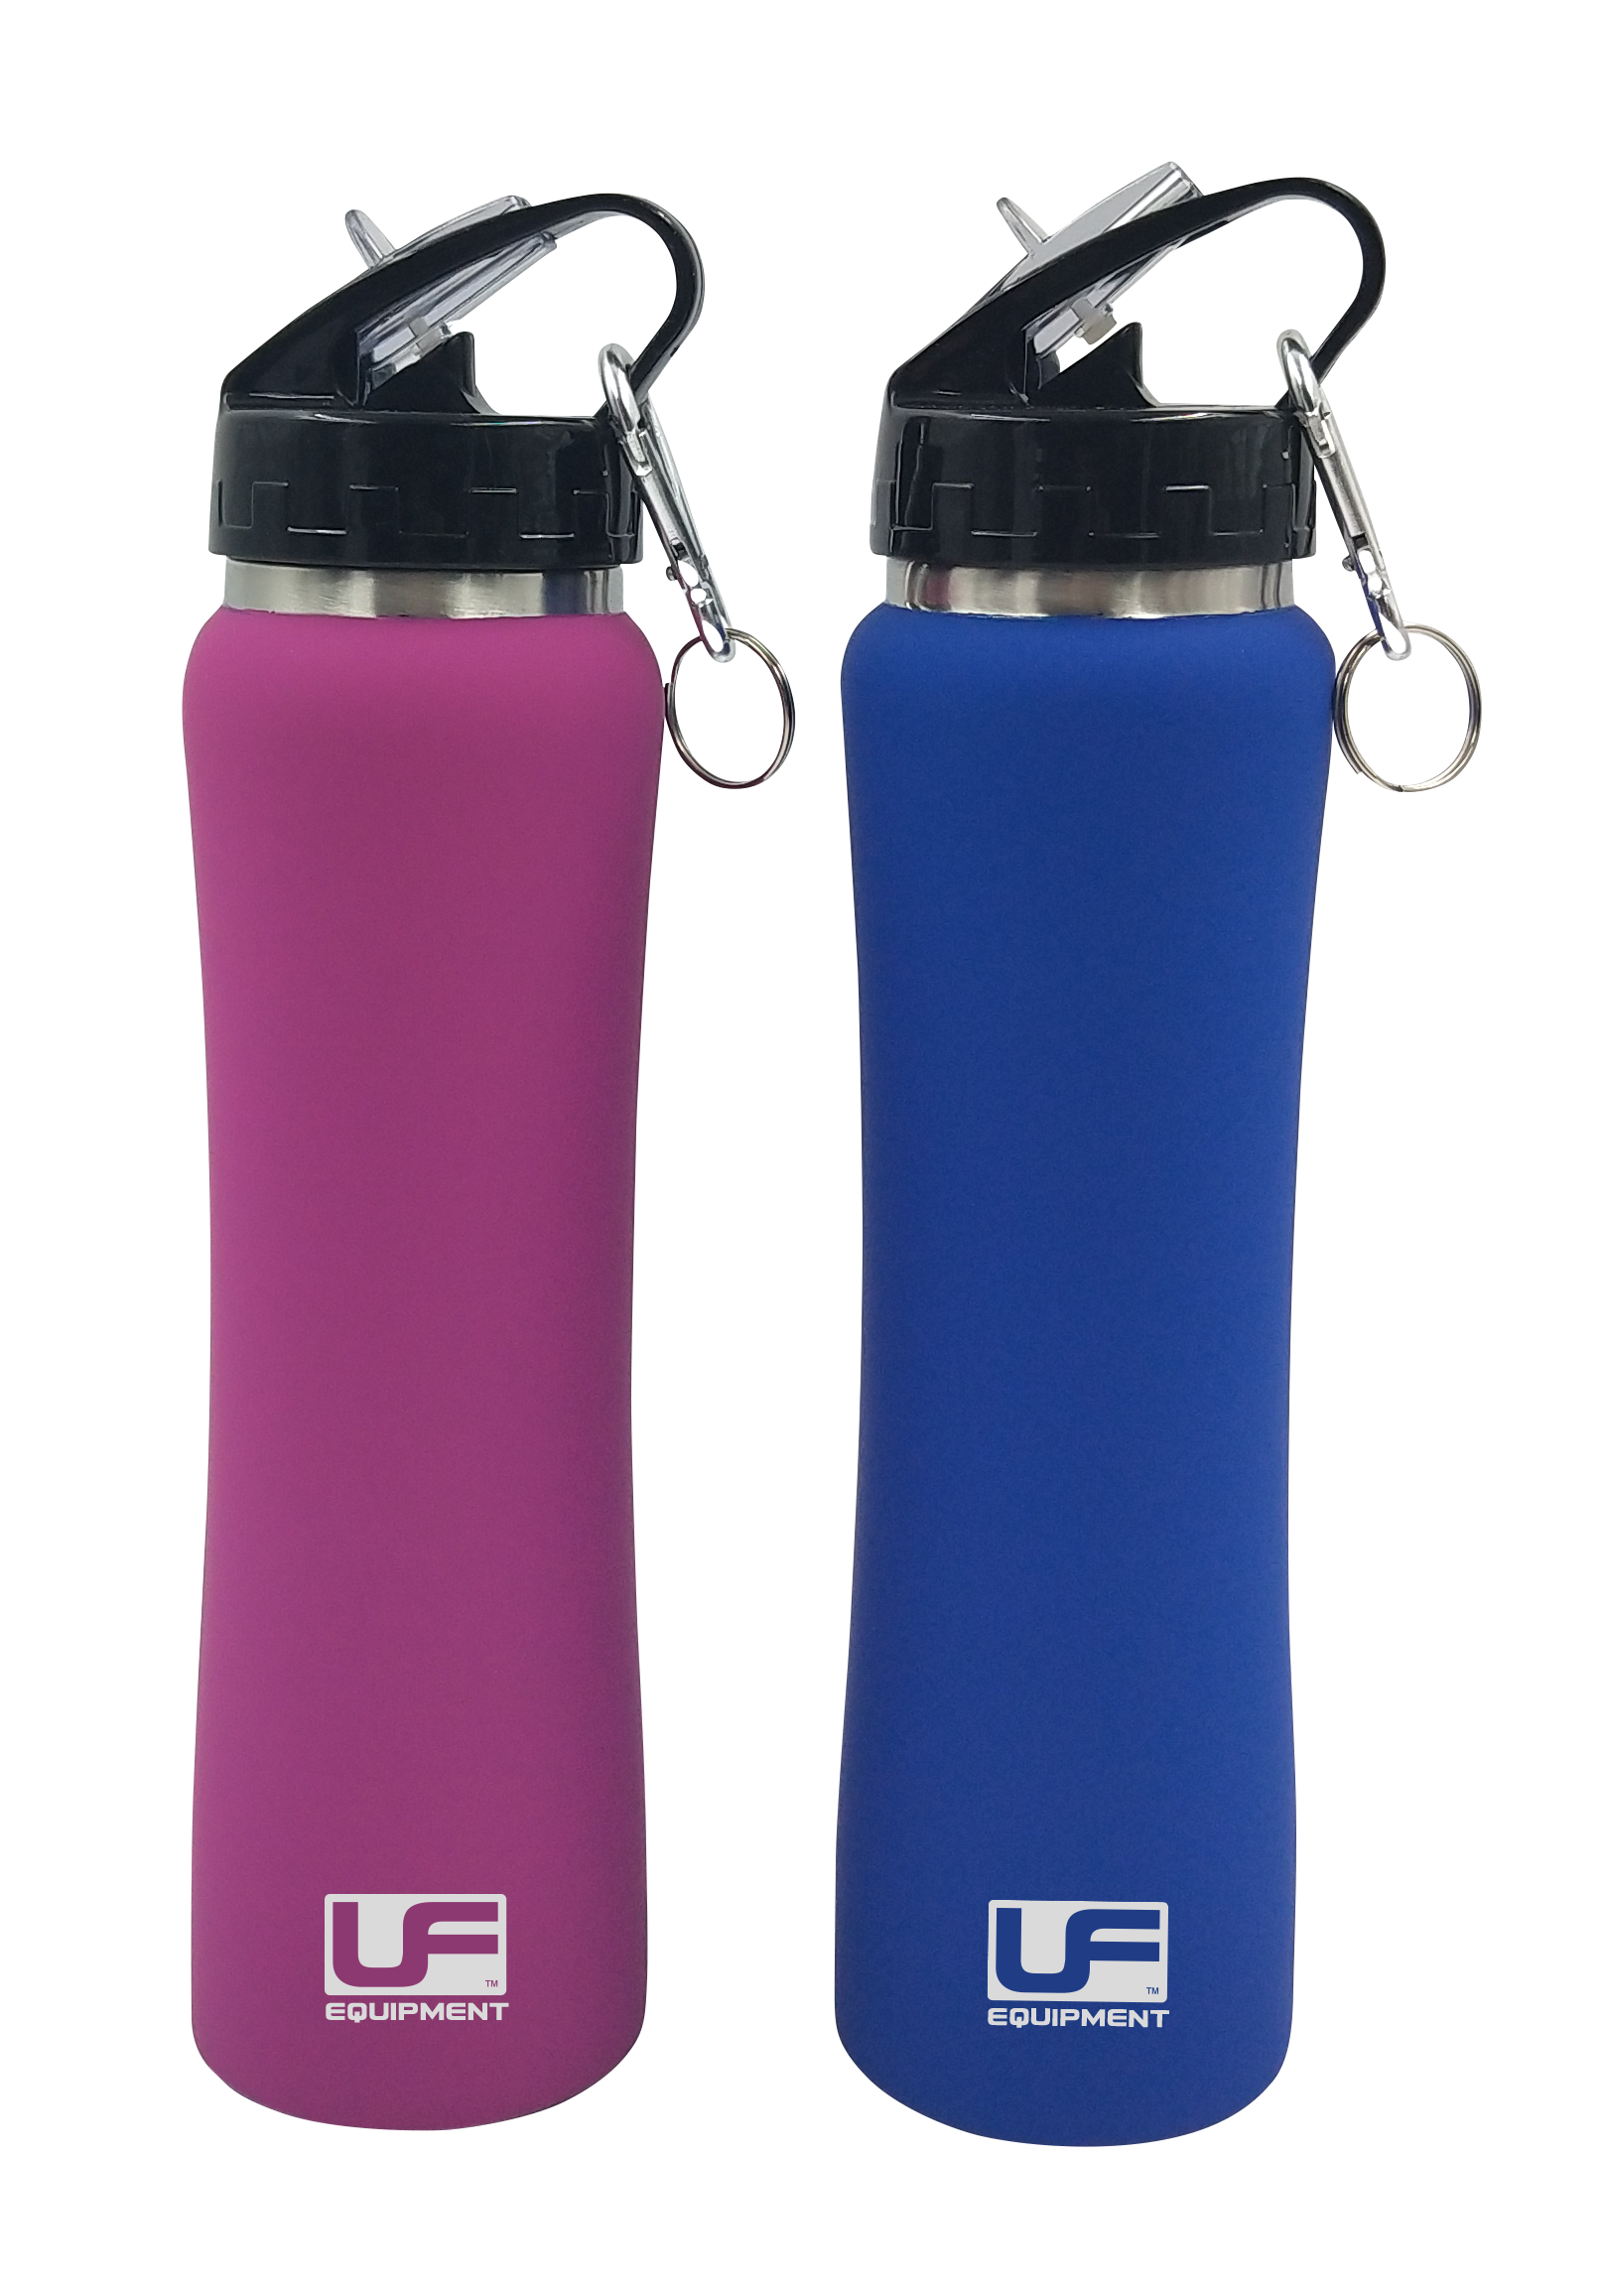 Free Sports Gym School Running QD440 Details about   Quadra Water Bottle and Holder 500ml 